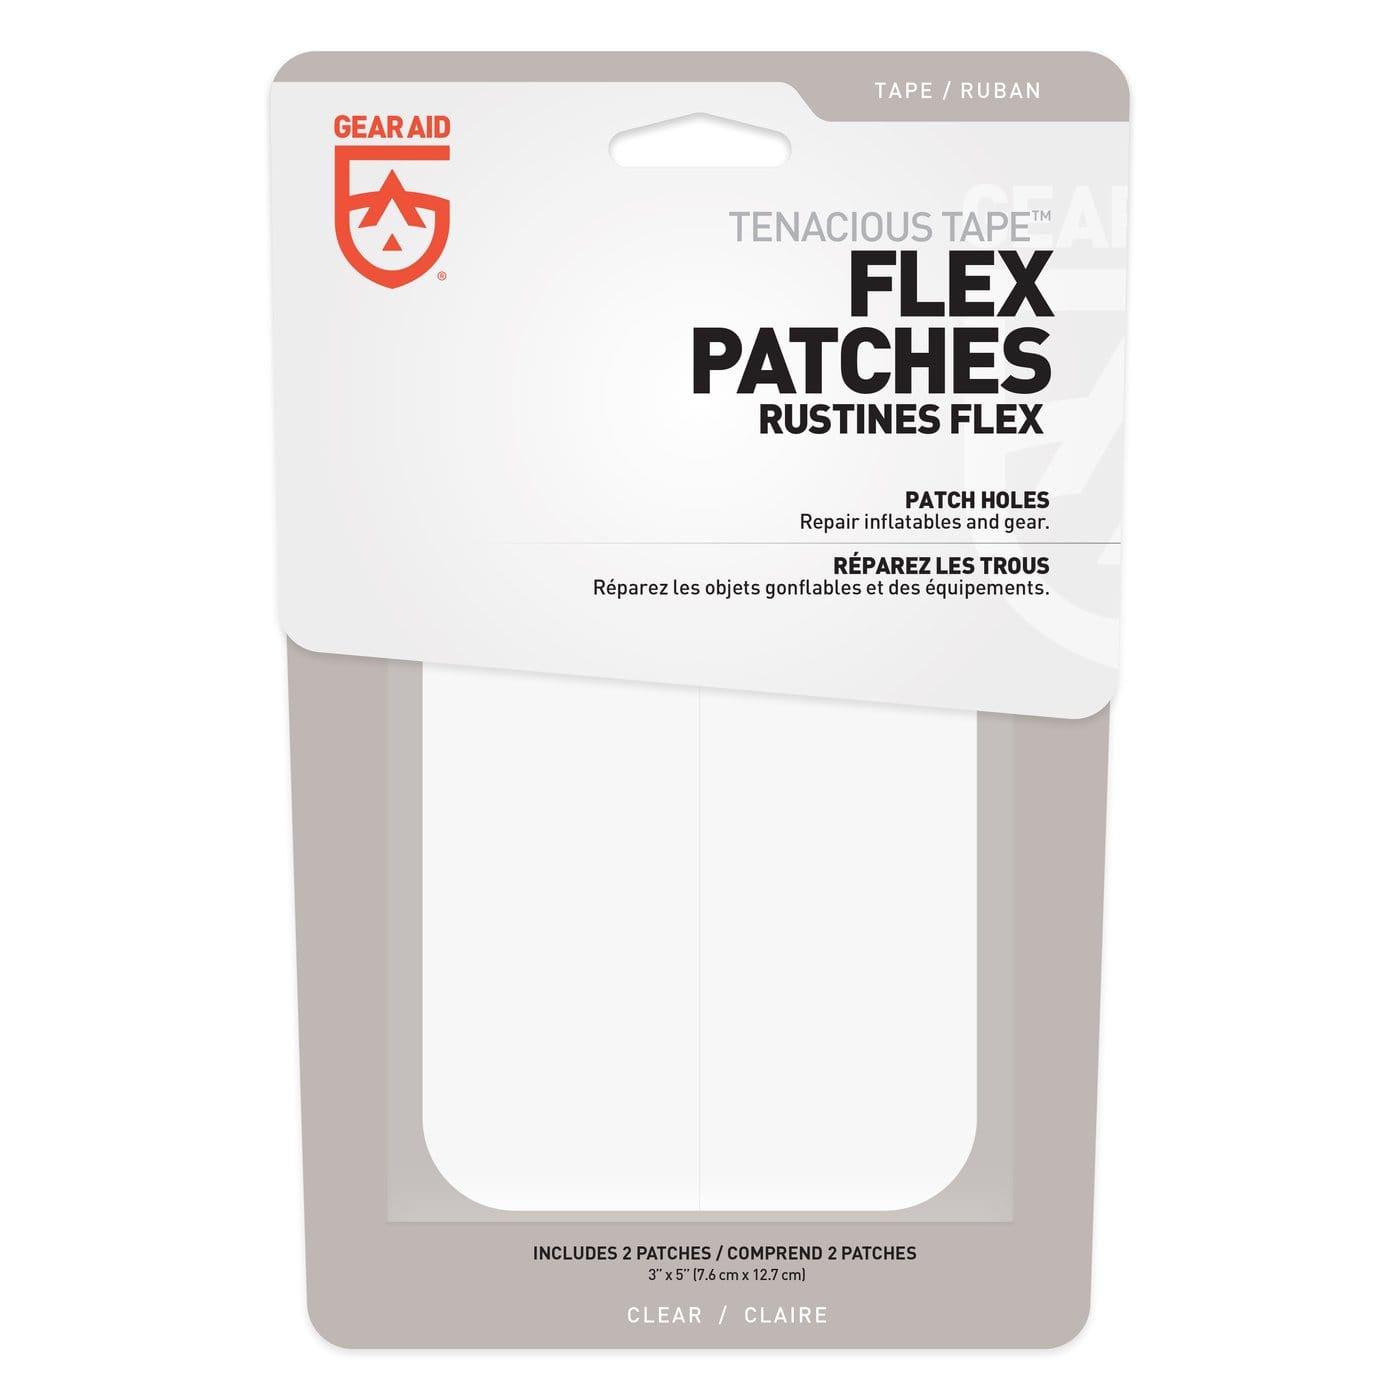 Package of Hummingbird Hammocks Tenacious Tape Max Flex Patches for repairing holes, clear color, prominently displaying product information and the brand logo.